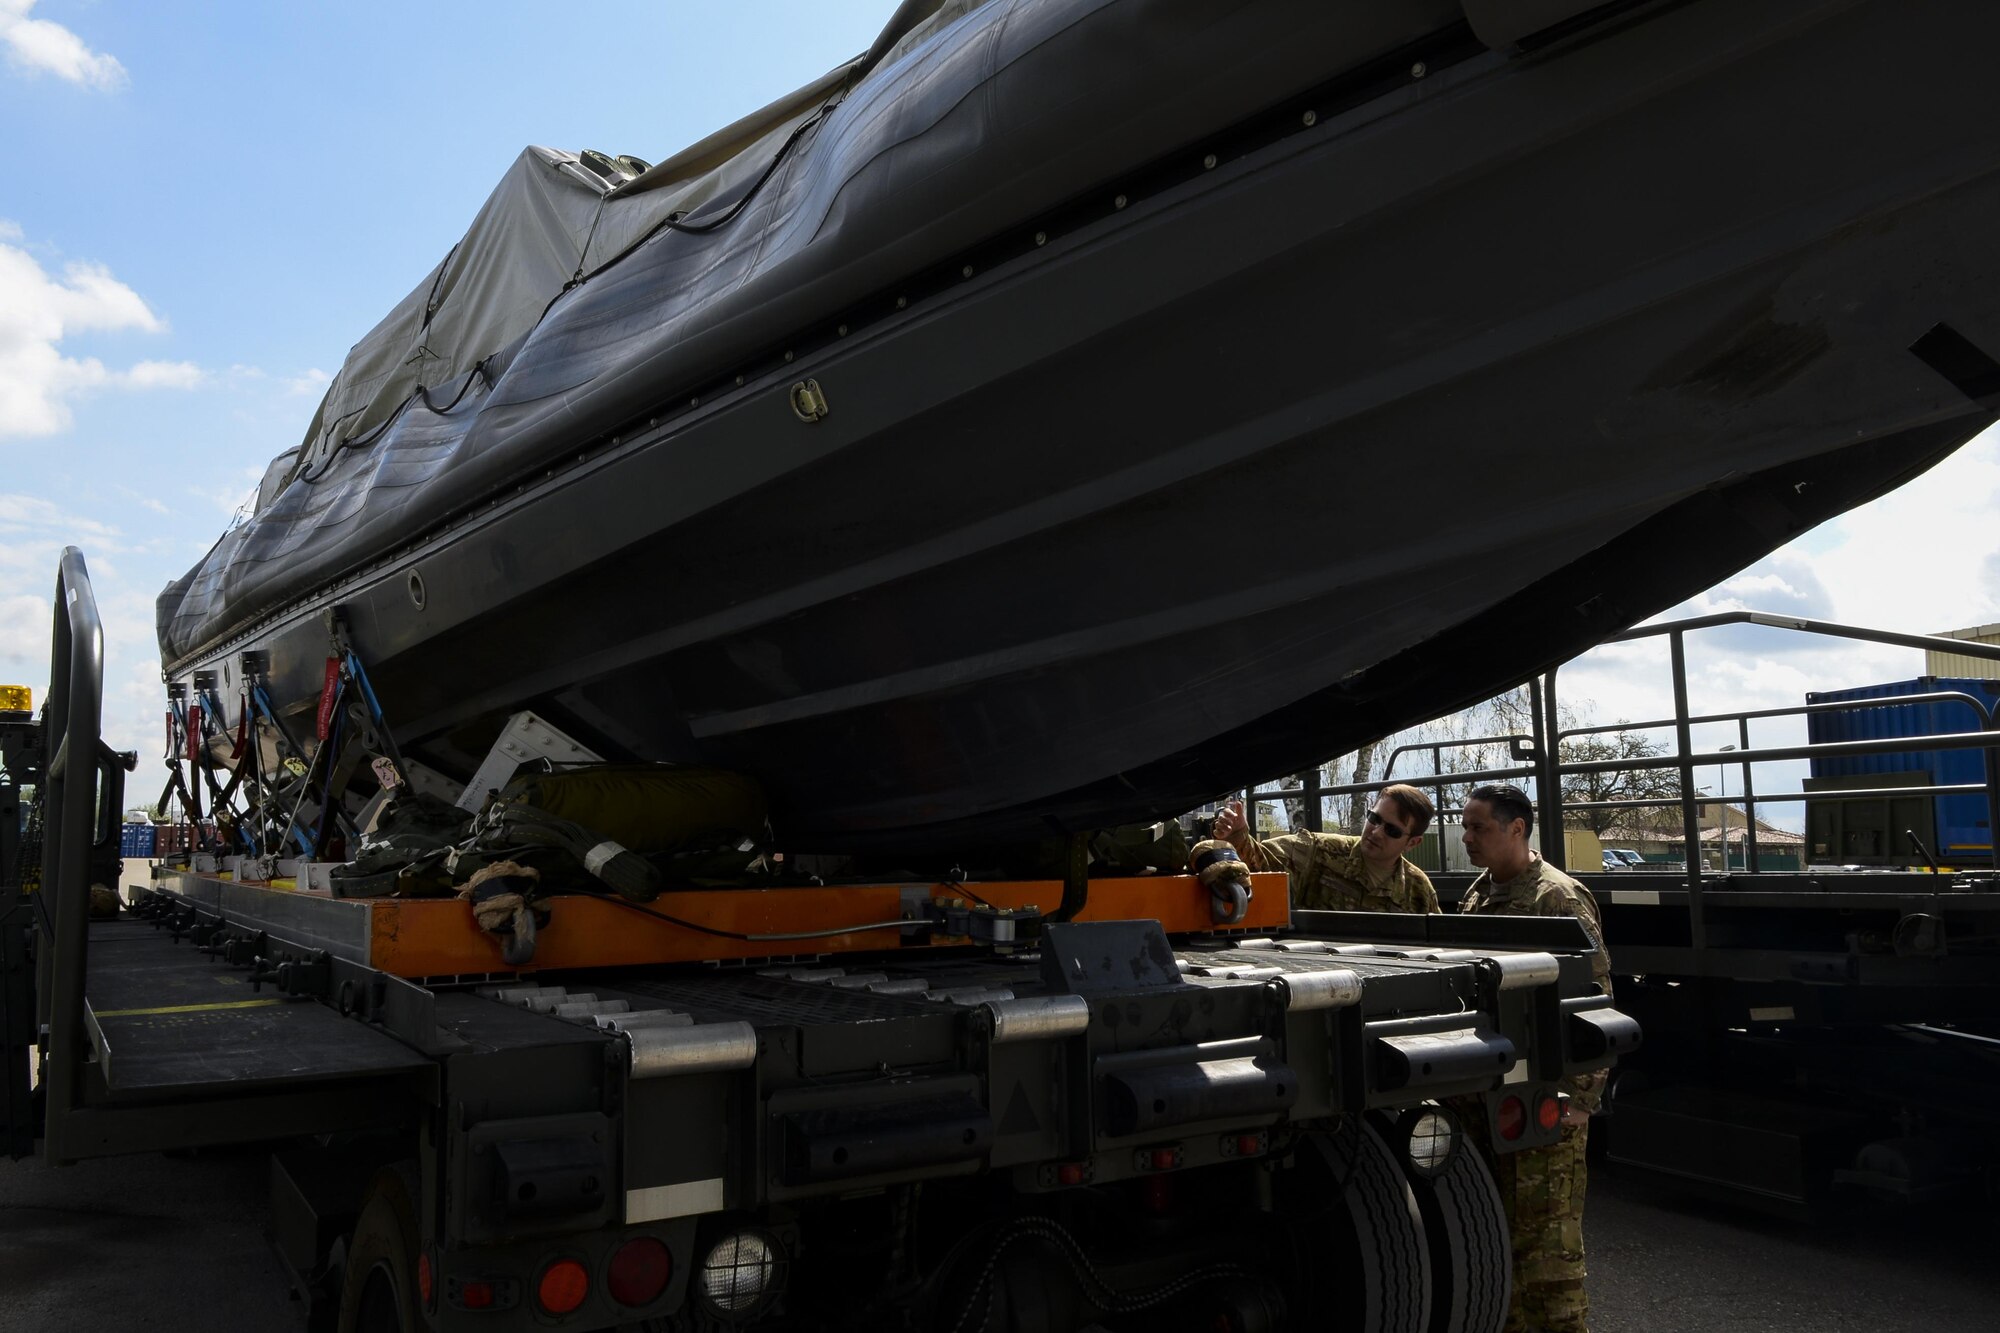 U.S. Air Force Master Sgt. Lino Gato and Senior Airman Nicholas Sternberg, both 67th Special Operations Squadron MC-130J Commando II loadmasters, inspect a Rigid Inflatable Boat before it is loaded onto an aircraft for a Maritime Craft Aerial Delivery System drop during an exercise April 14, 2016, at Stuttgart Air Base, Germany. Airborne Systems MCADS is the only airdrop system currently in service that is capable of delivering large Rigid Inflatable Boats. (U.S. Air Force photo by Senior Airman Victoria H. Taylor/Released)